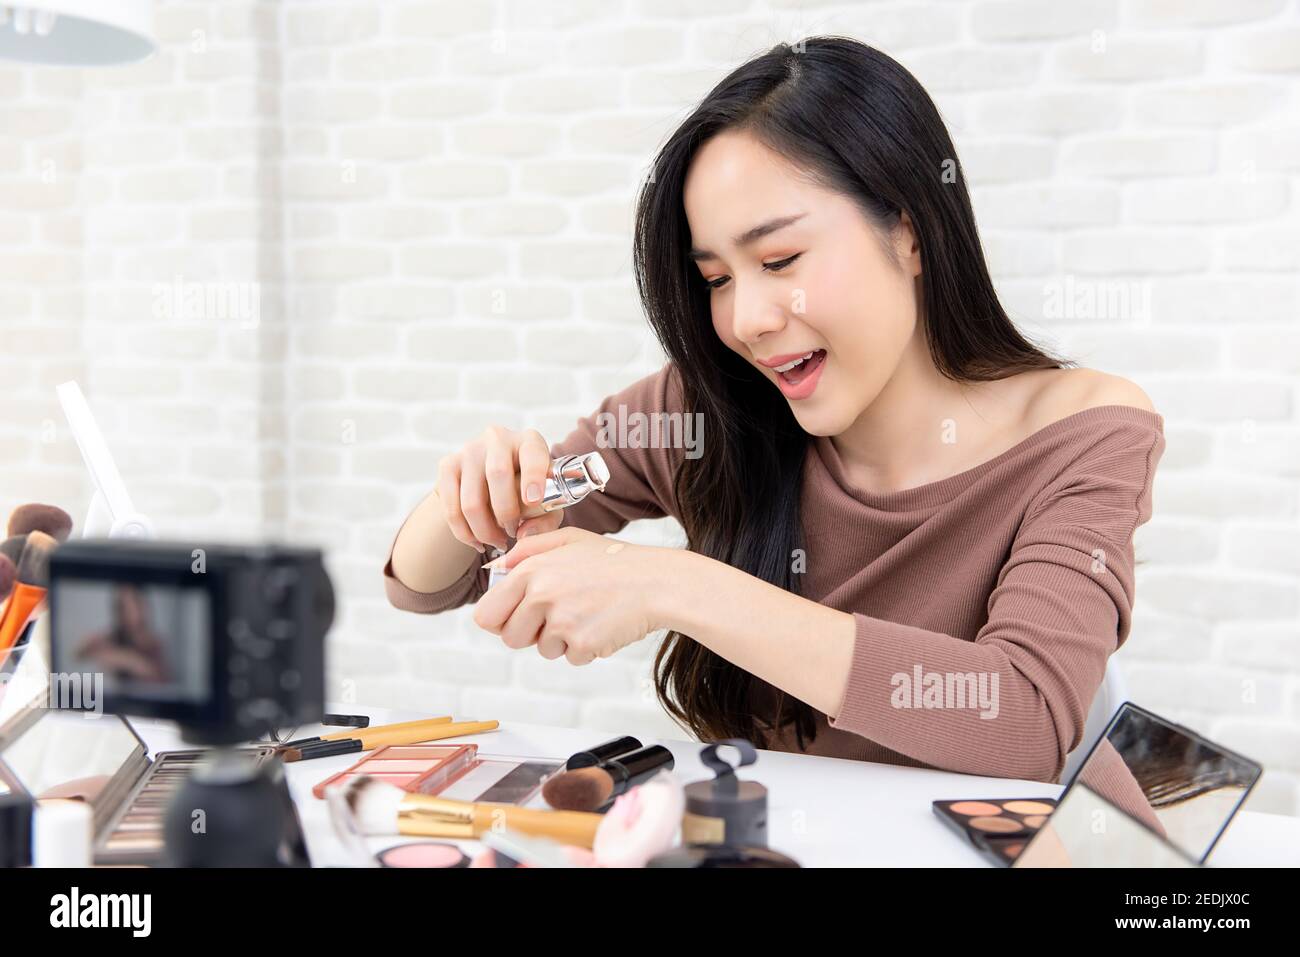 Young beautiful Asian woman professional beauty vlogger or blogger live broadcasting cosmetic makeup review on social media Stock Photo